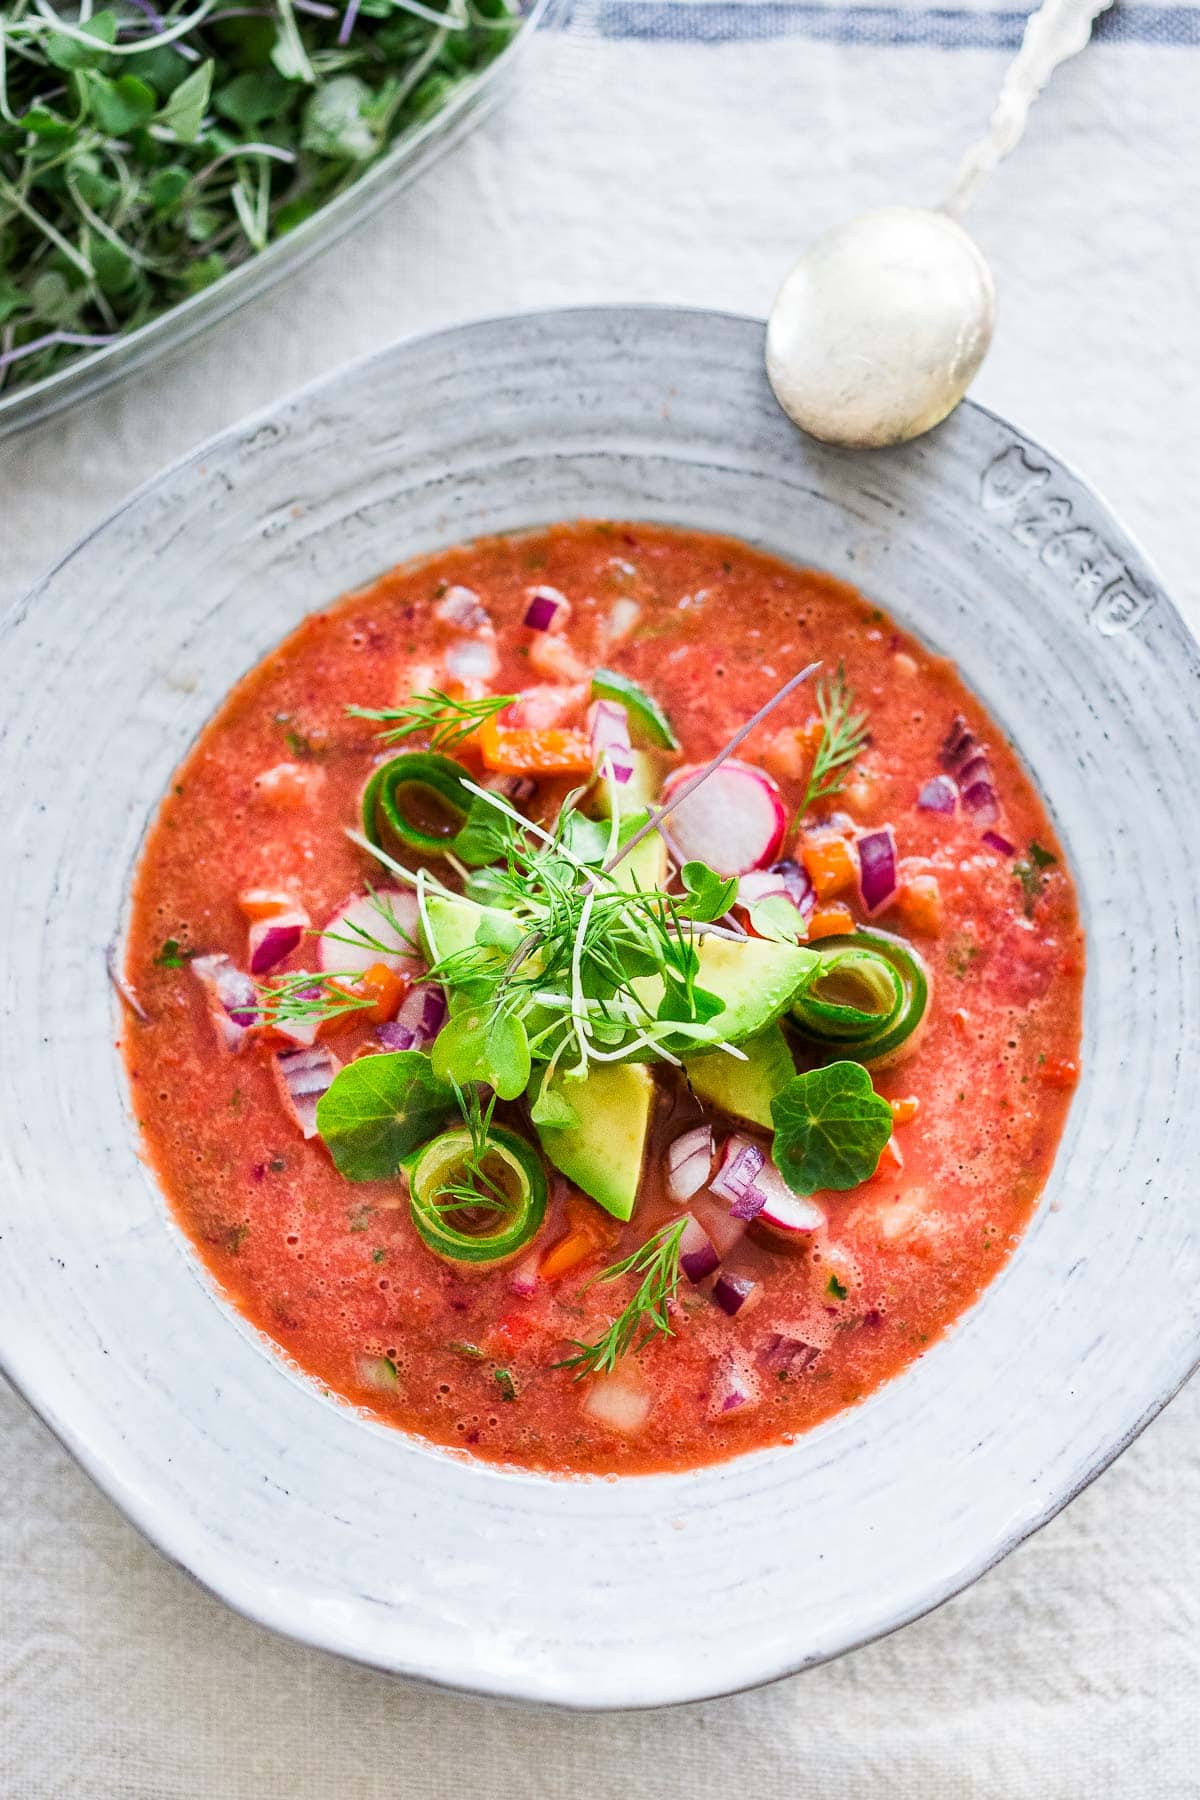 Cool and refreshing, Watermelon Gazpacho is just what the doctor ordered on hot summer days!  This cold watermelon soup is chilled, then topped with cool, crunchy cucumber, red onion, red bell pepper, avocado, microgreens, and fresh herbs; it's a treat for the senses and nourishes the body!